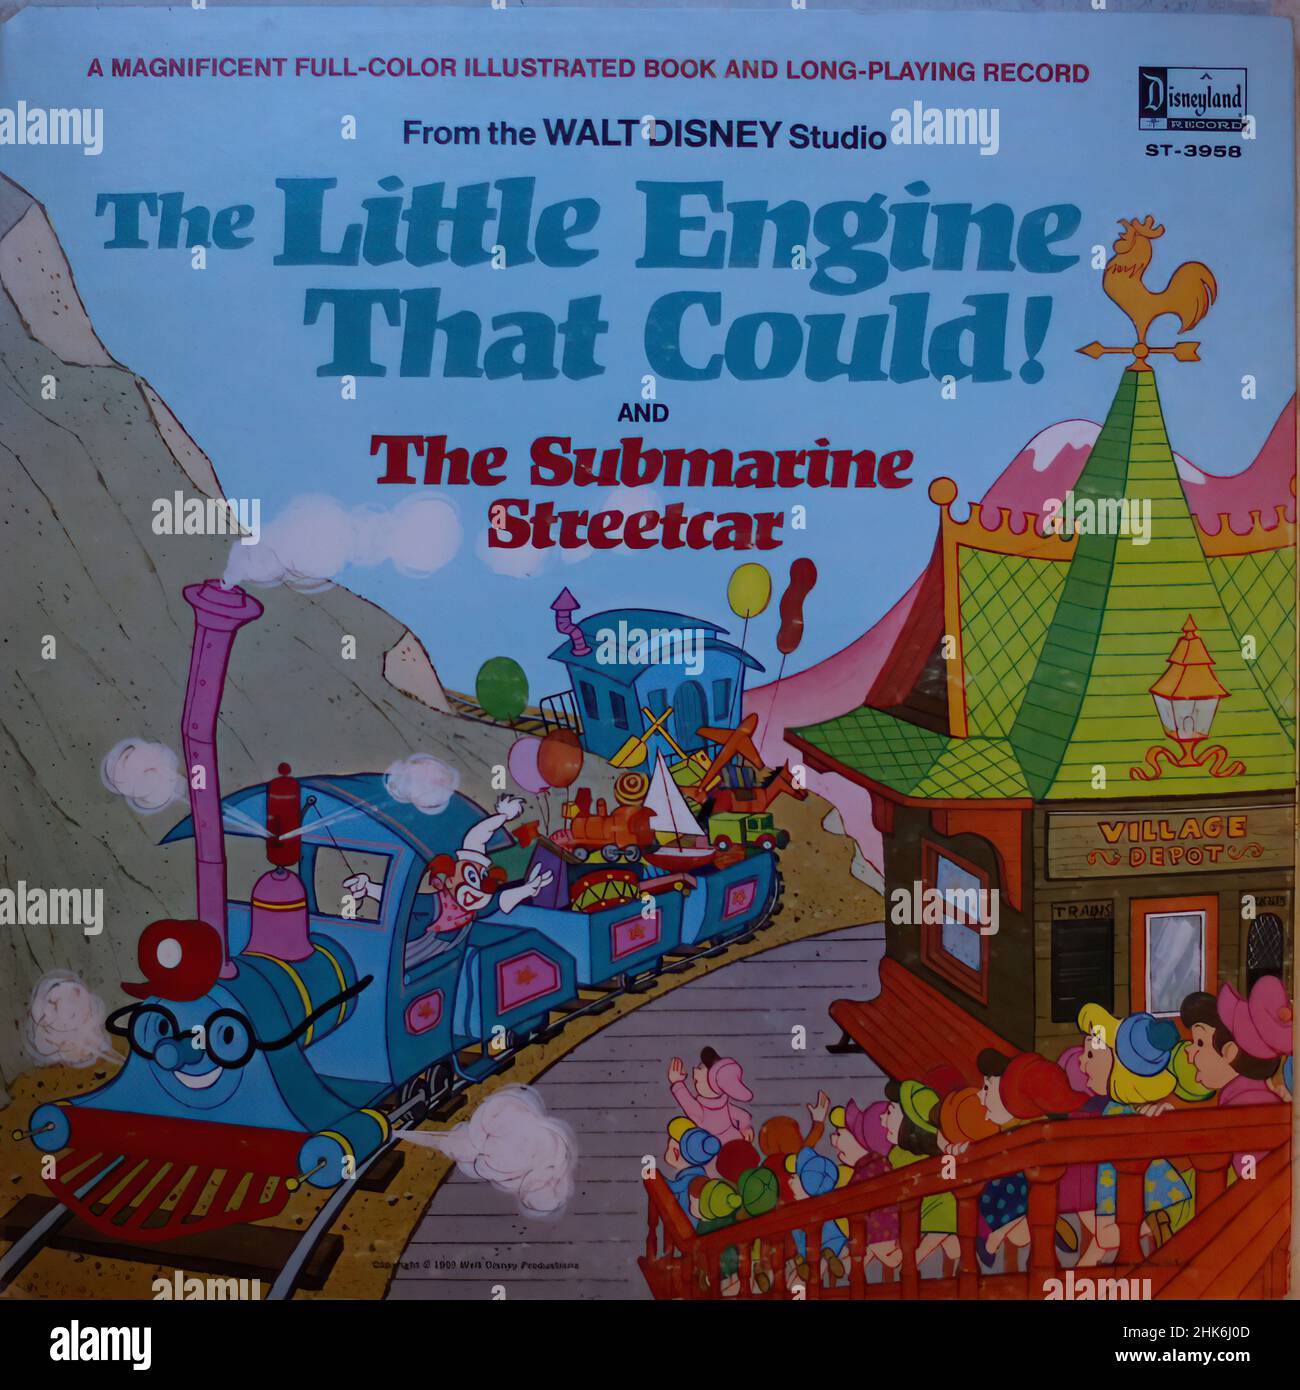 Vintage vinyl record cover -  The Little Engine That Could 00001 Stock Photo